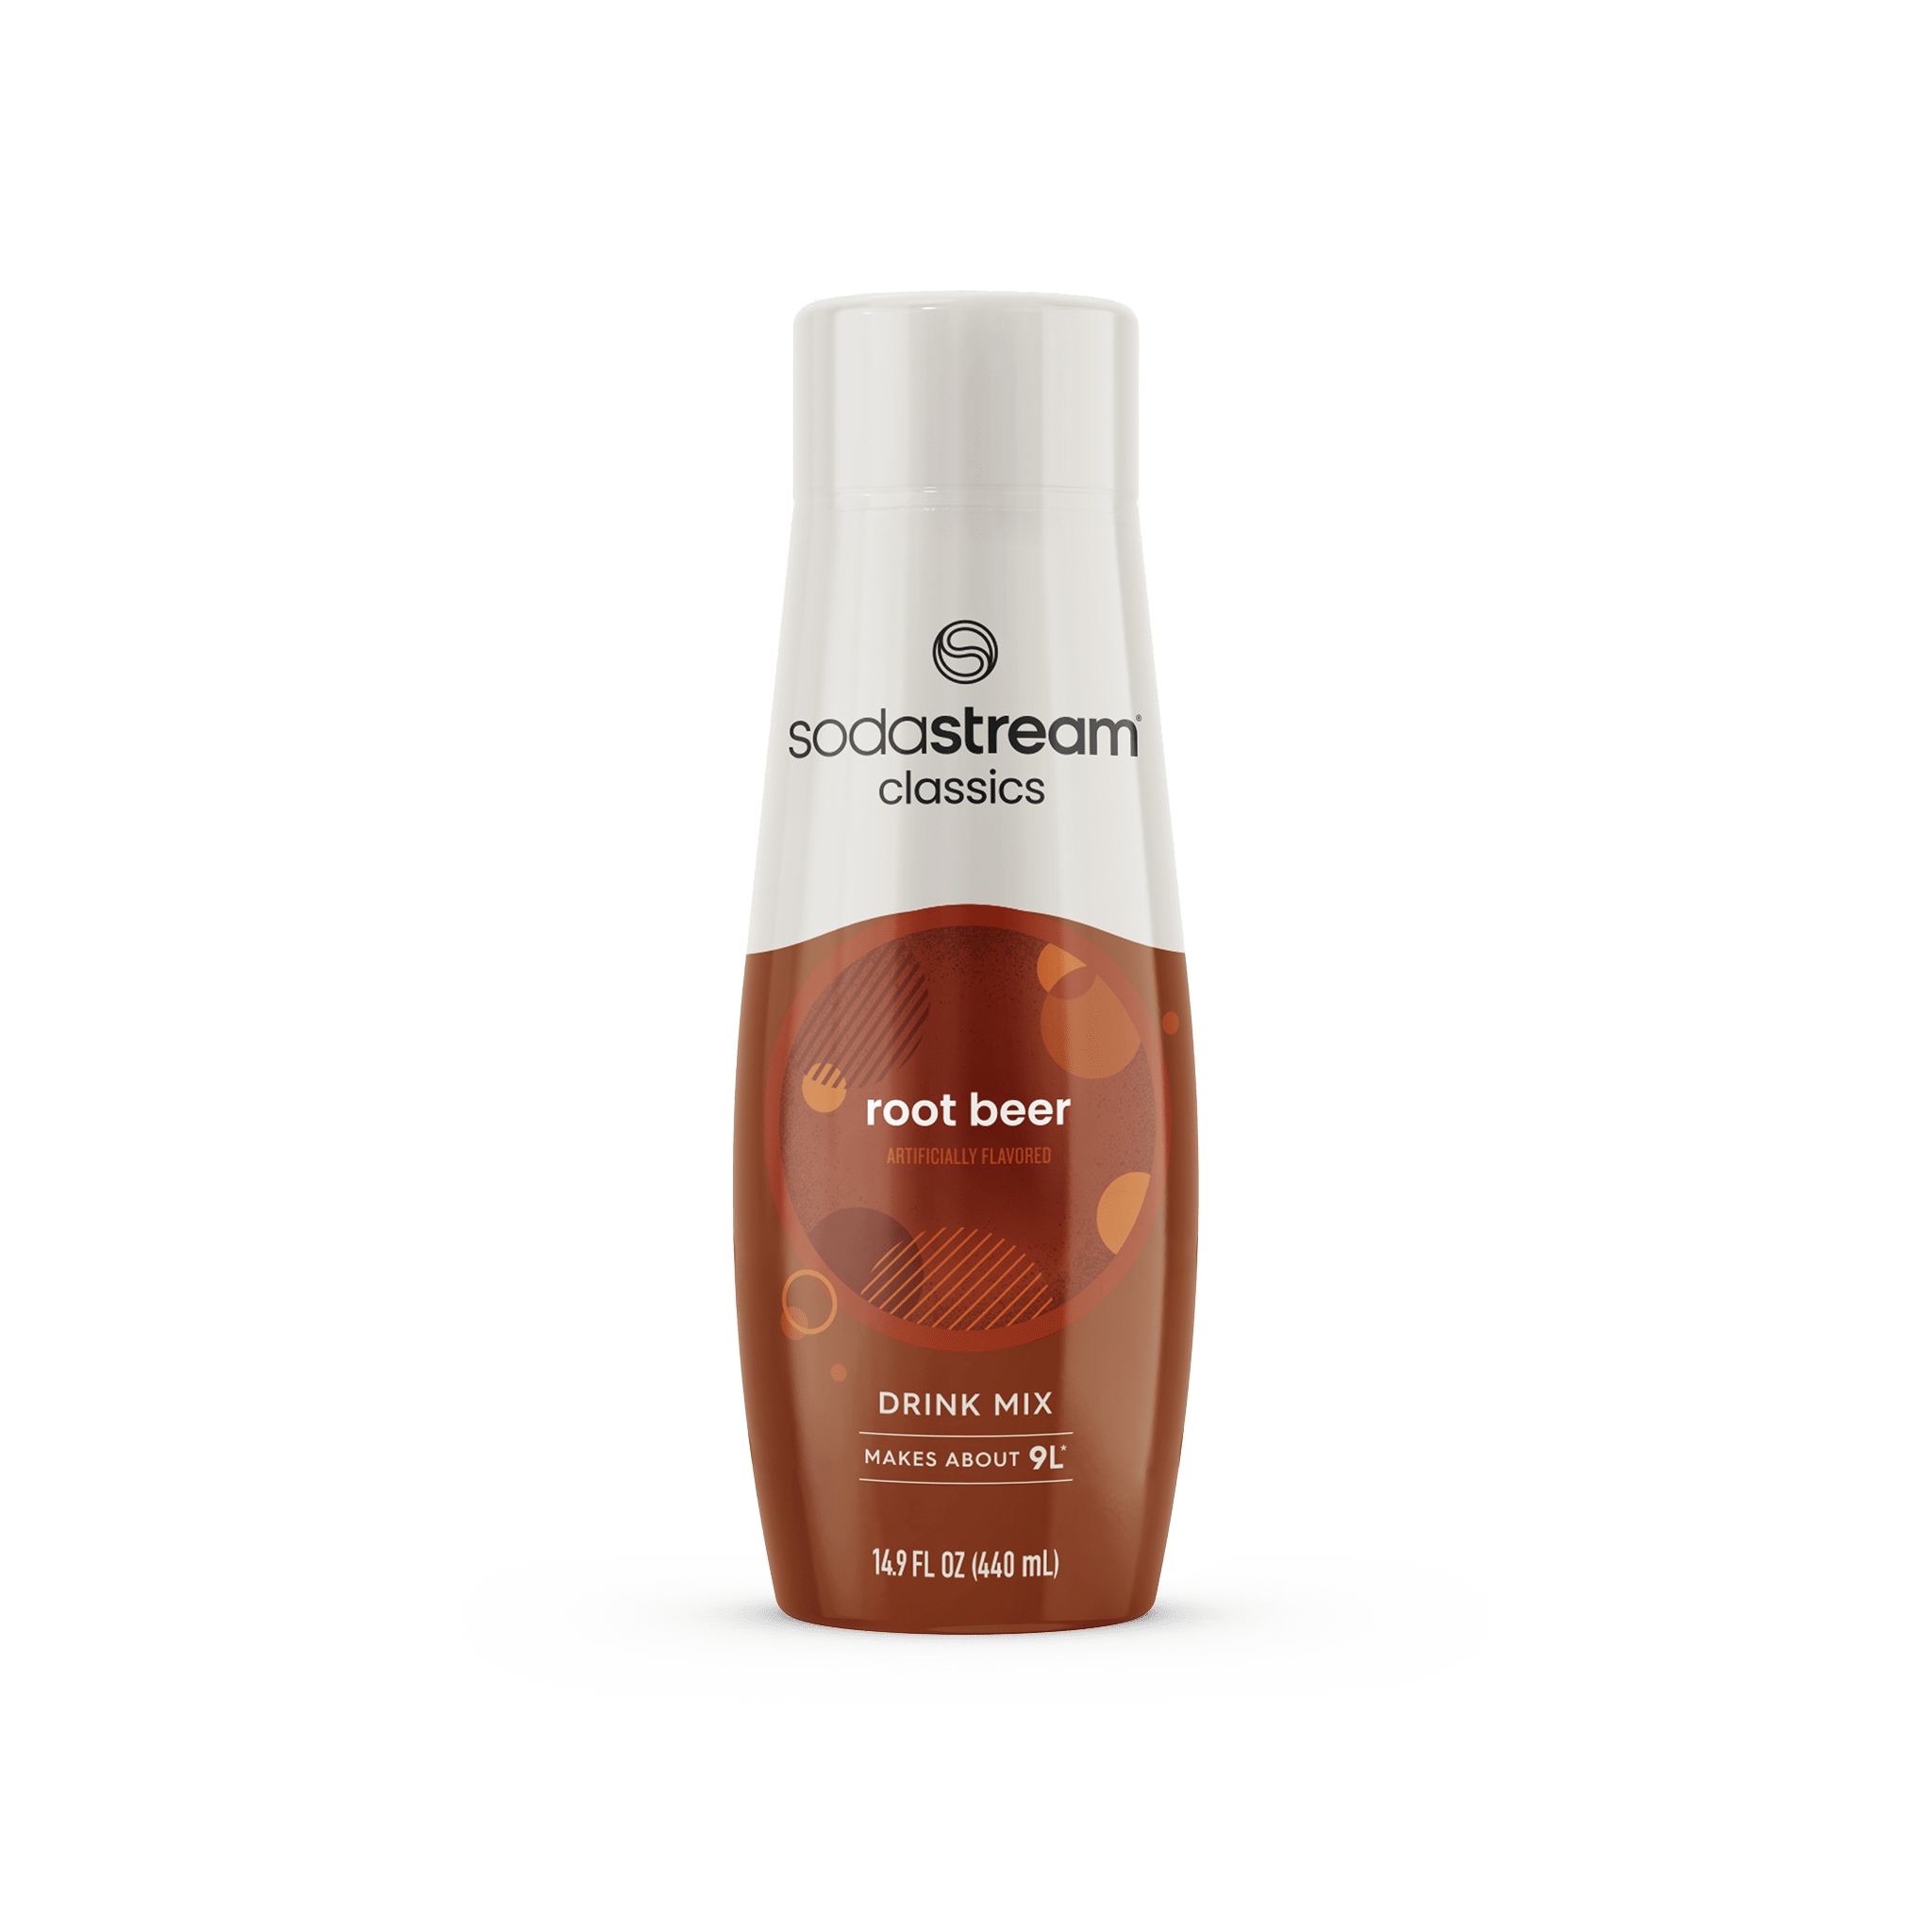 root beer sodastream syrup drink mix